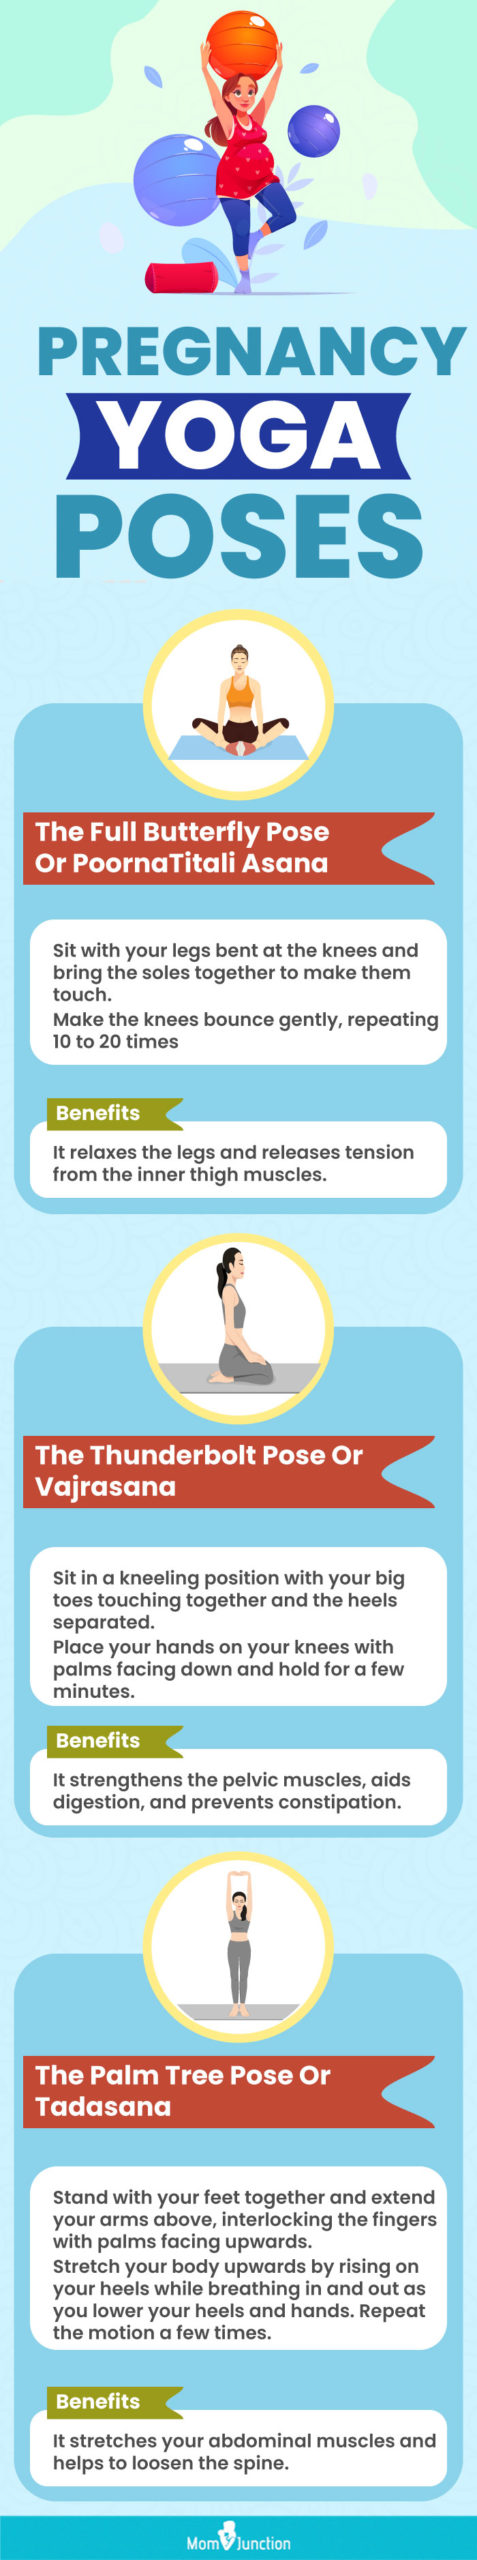 Infographic Top Pregnancy Yoga Asanas And Their Benefits scaled